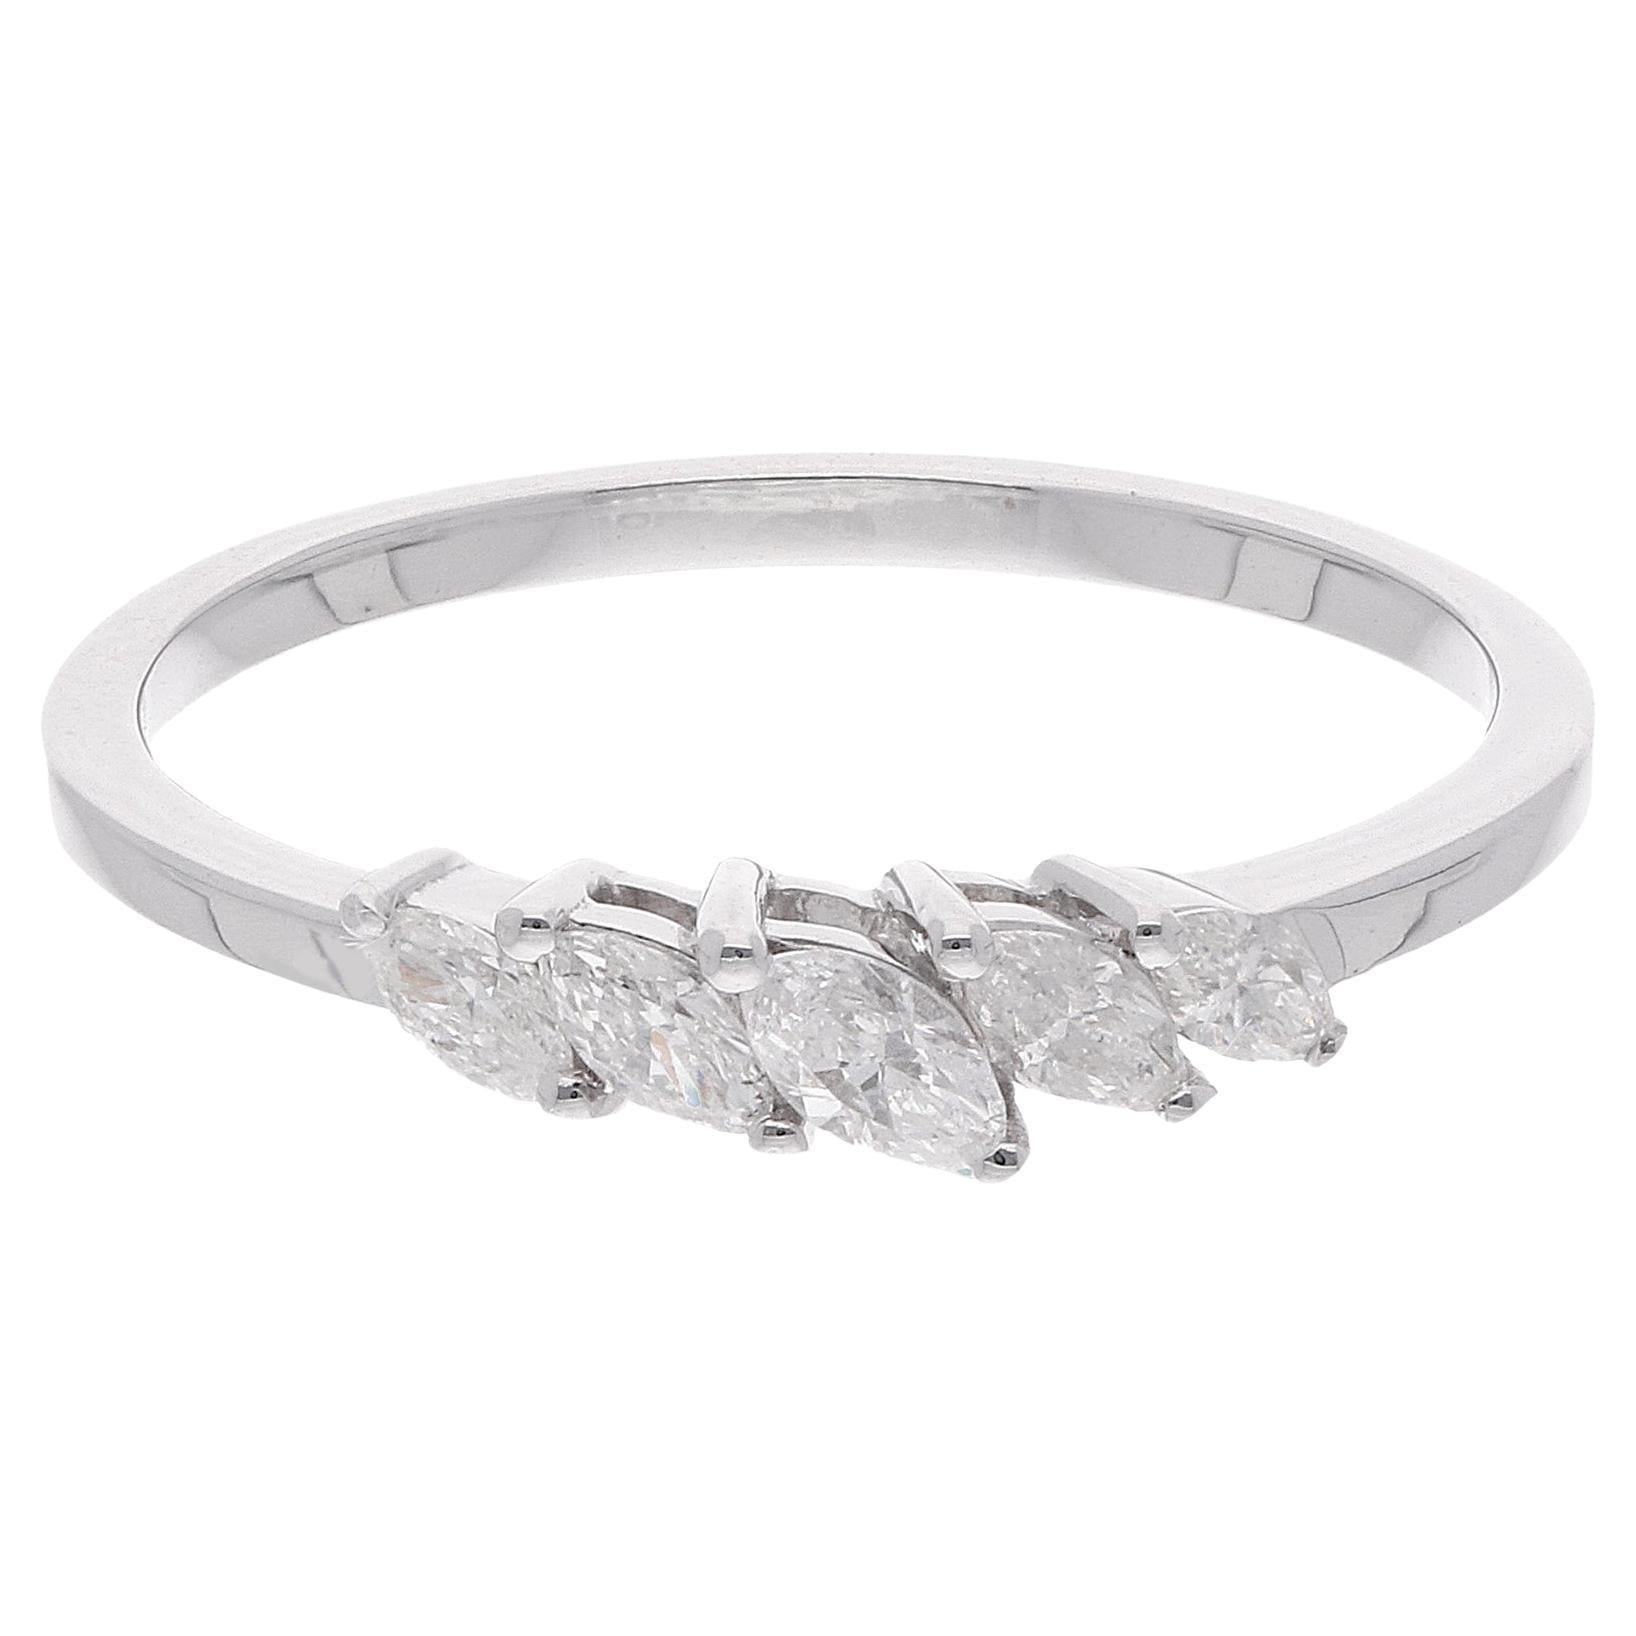 0.32 Carat Si Clarity Hi Color Marquise Diamond Band Ring 18 Karat White Gold For Sale